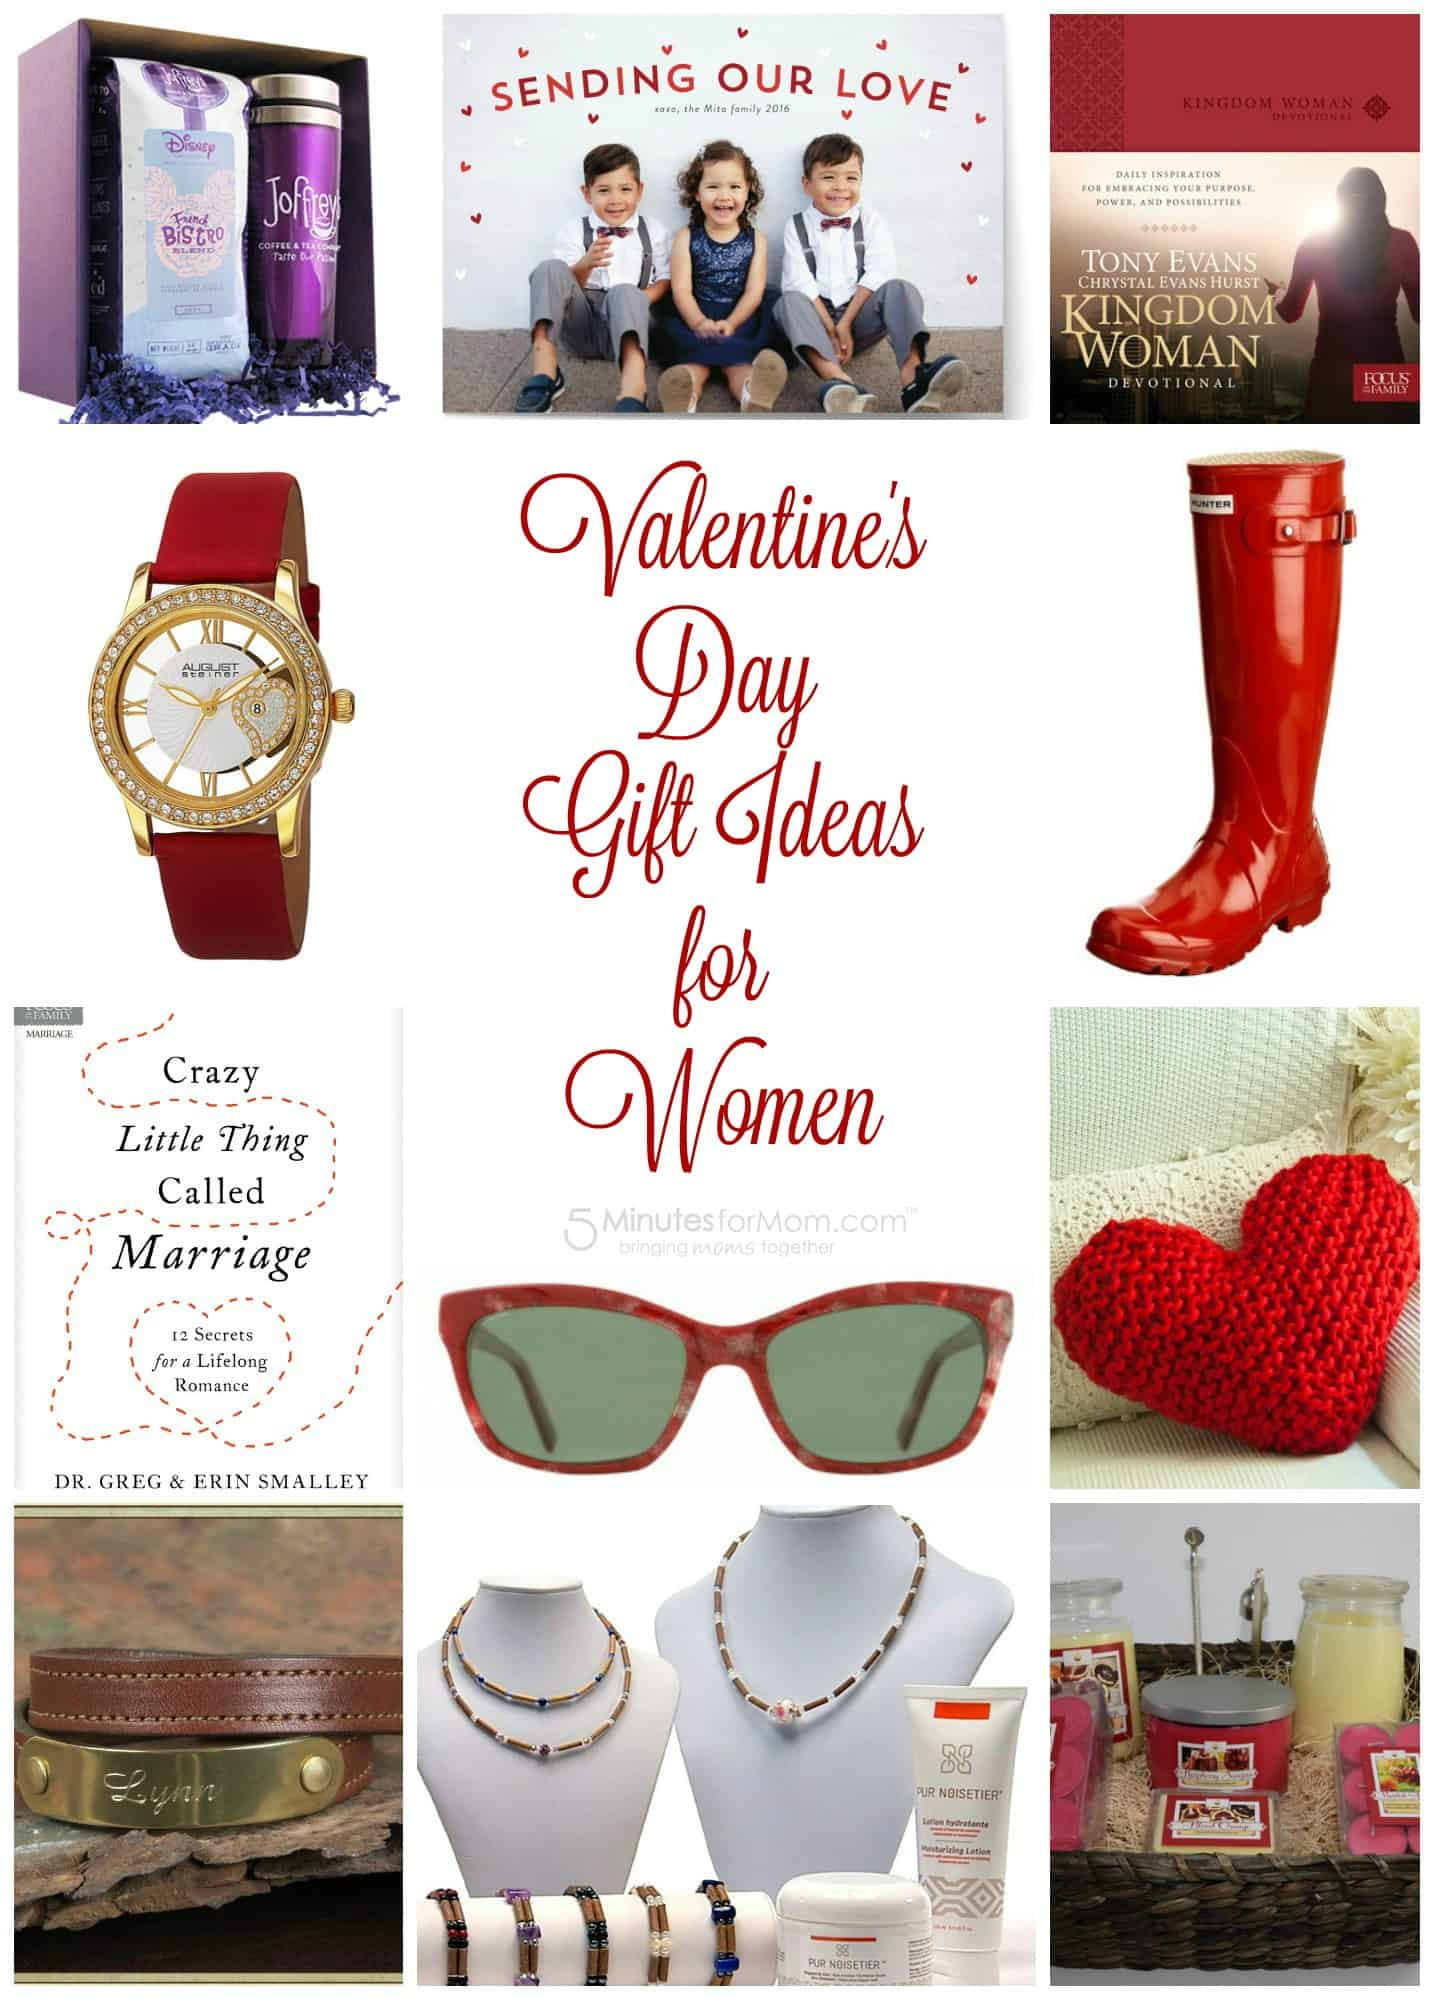 Valentines Gift Ideas For Girls
 Valentine s Day Gift Guide for Women Plus $100 Amazon